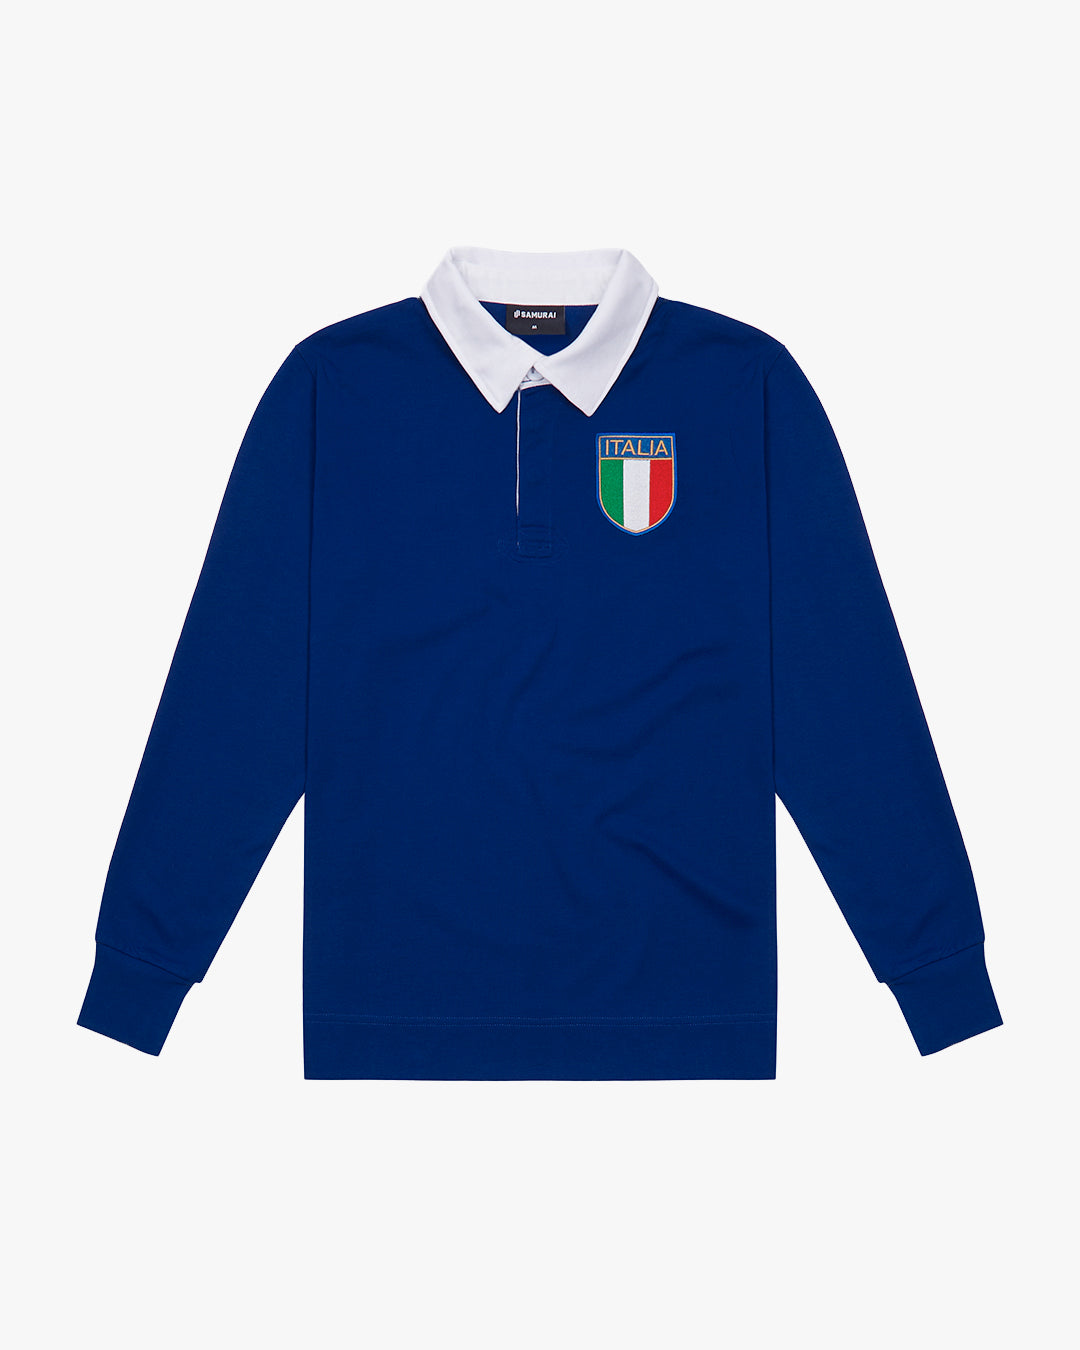 VC: ITA - Women's Vintage Rugby Shirt - Italy